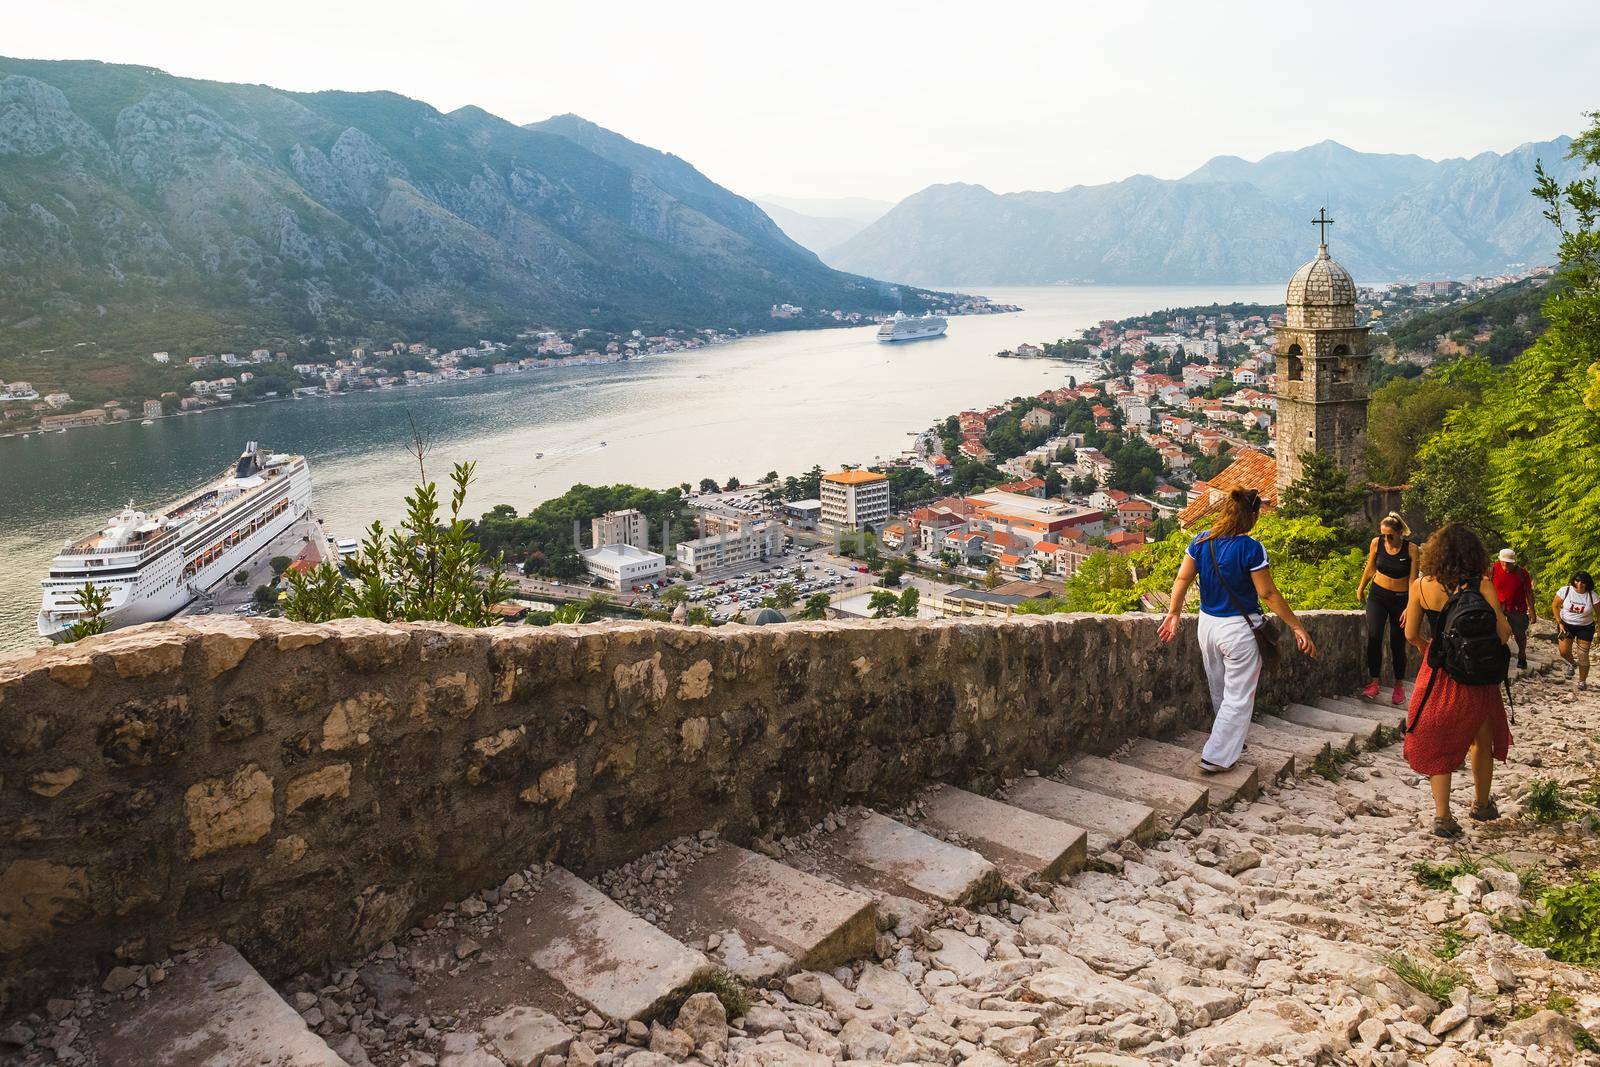 KOTOR, MONTENEGRO - September 16, 2019: Tourists climbing up and down the stairs of the ancient fortress ruins in the Bay of Kotor and old city of Kotor in Montenegro